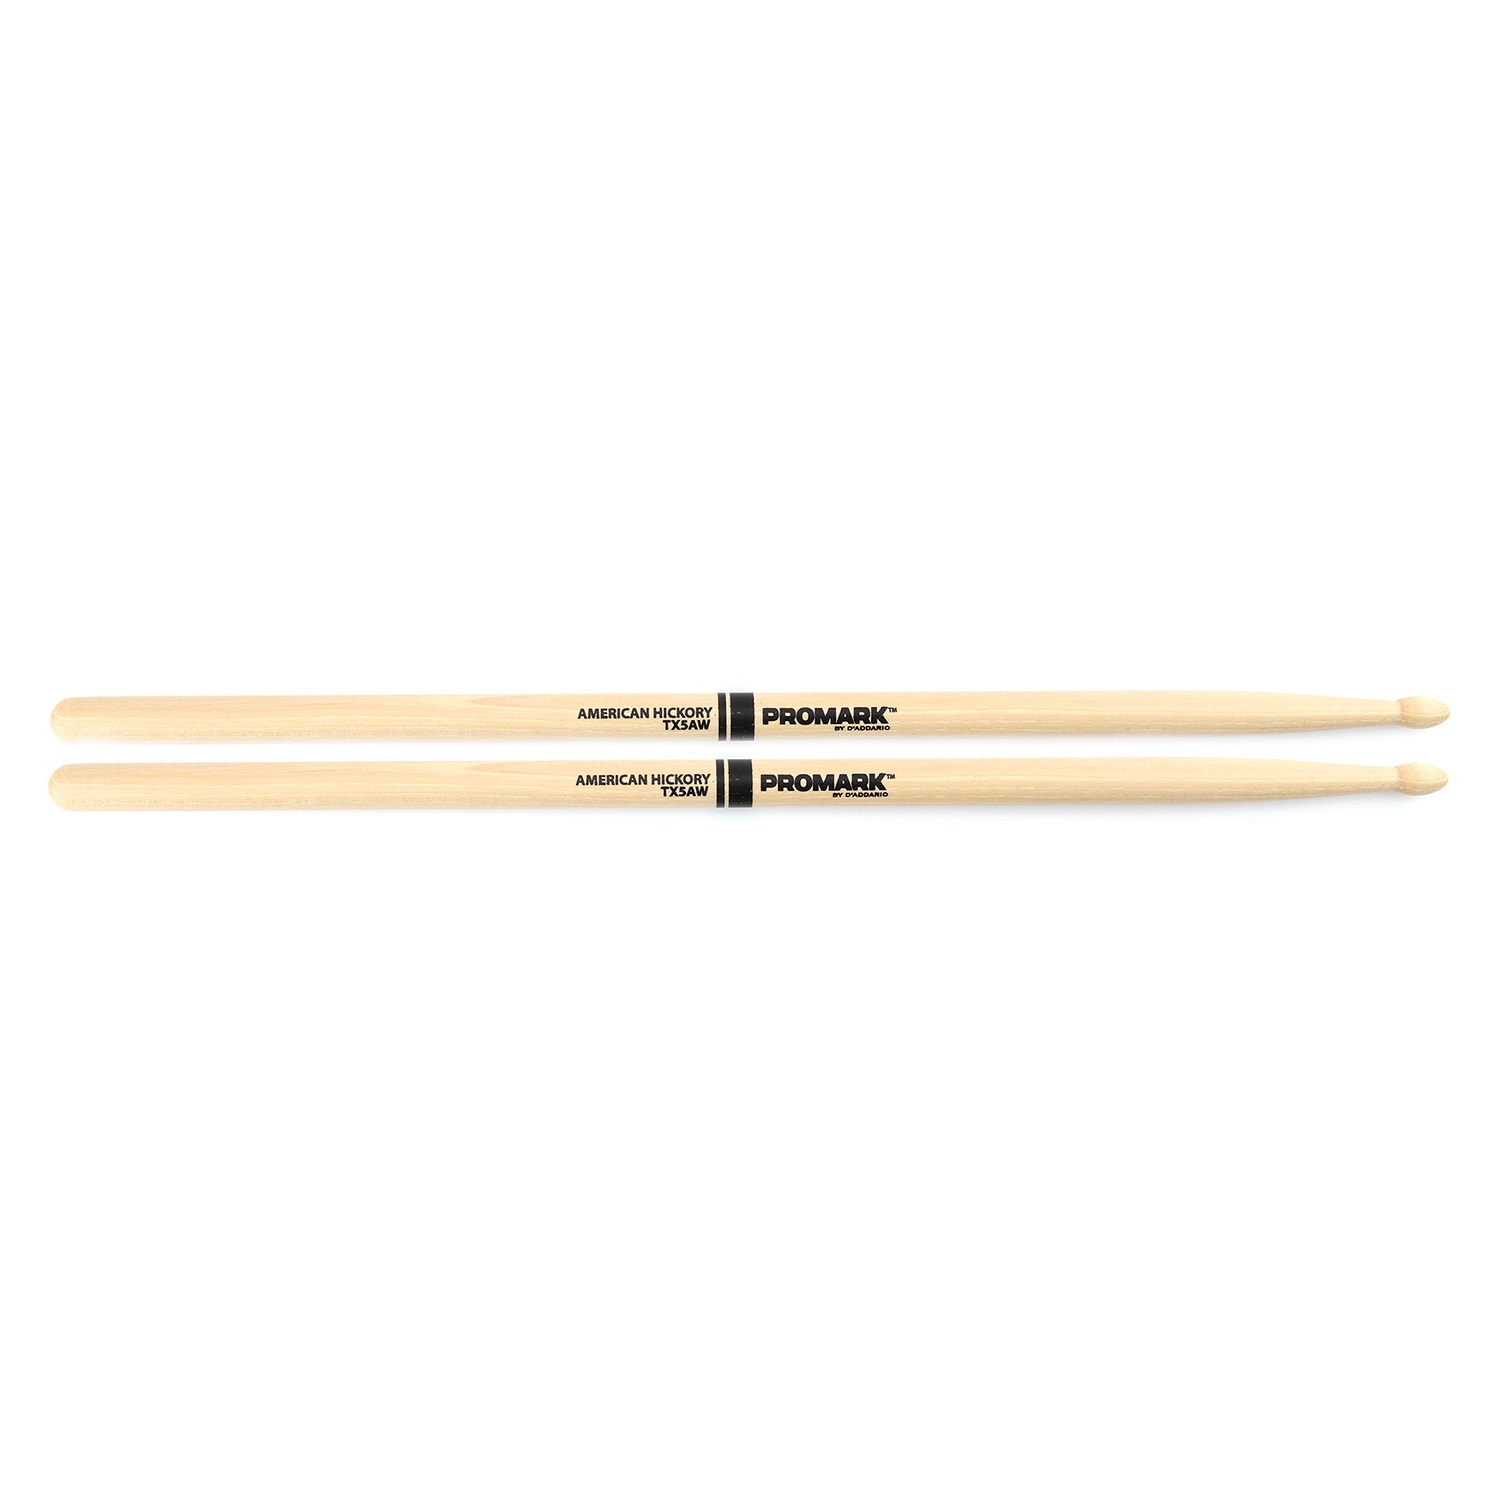 An image of Promark Hickory 5A Wood Tip Drumstick Pair - Gift for a Drummer